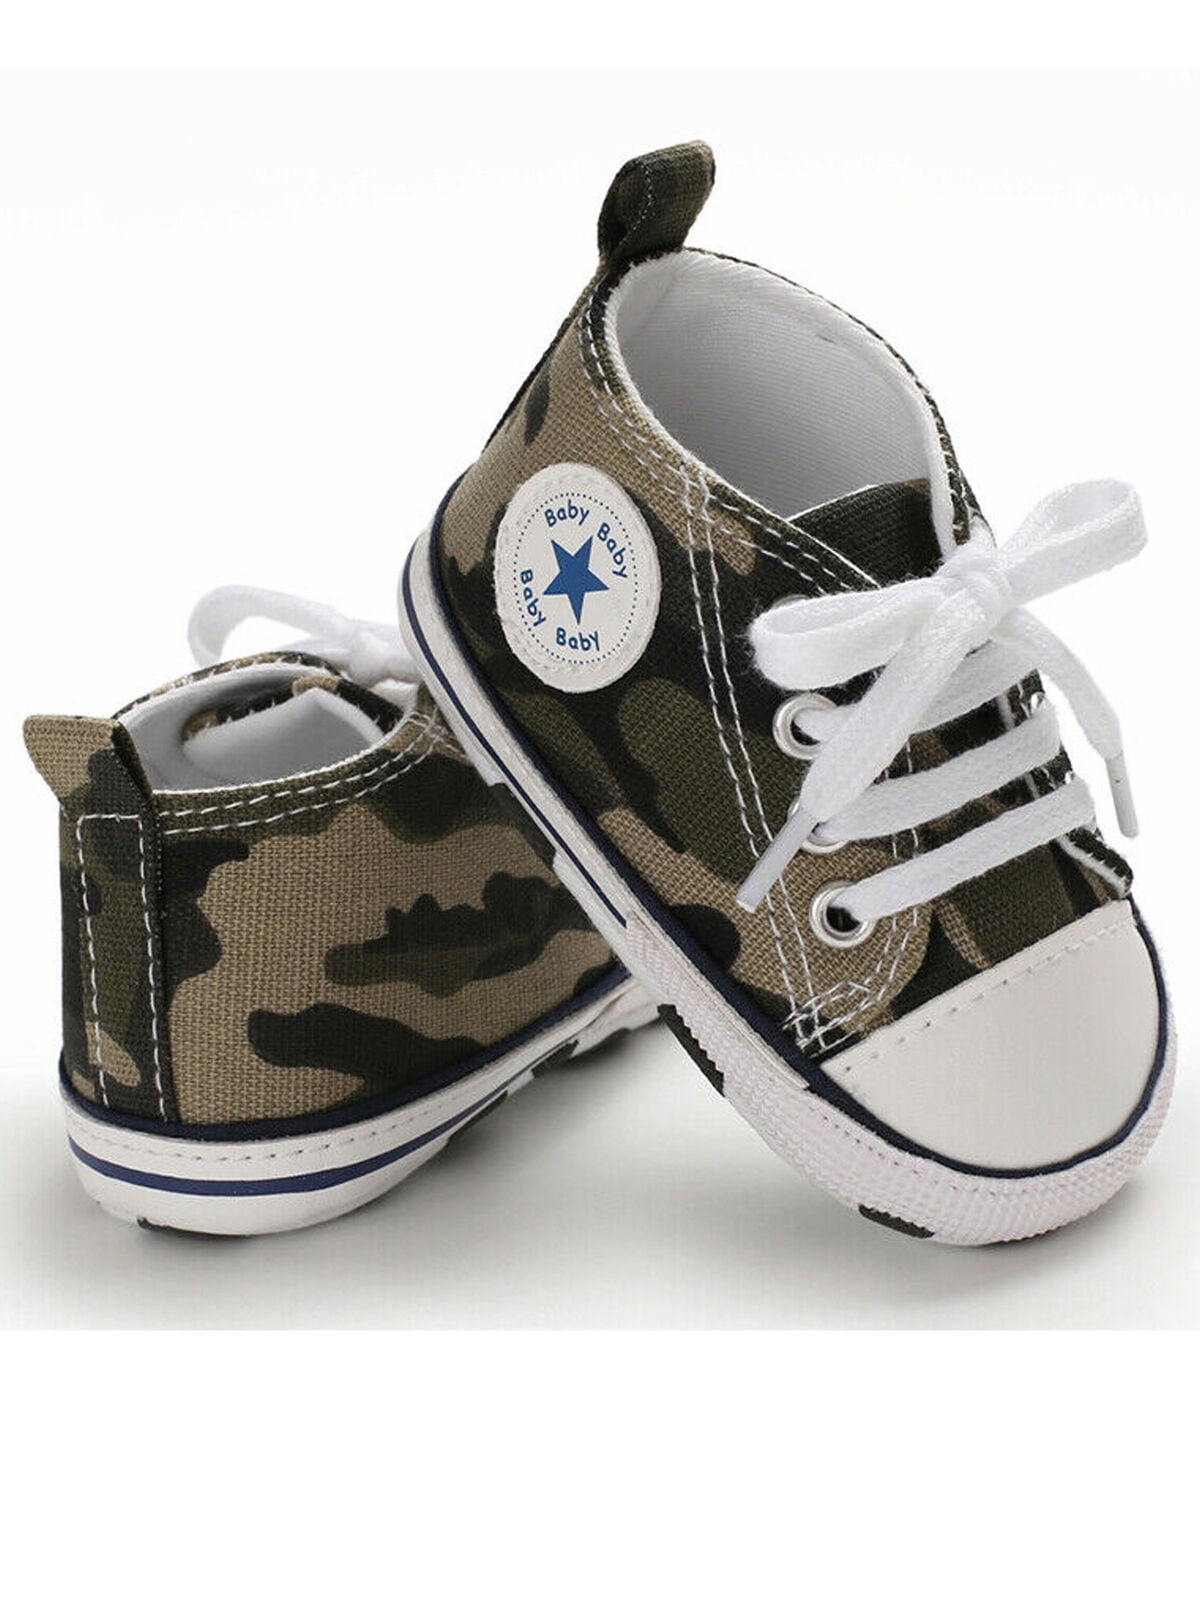 Fashion Infant Baby Boy Girl First Crib Shoes Canvas Sneakers Newborn to 18Month 